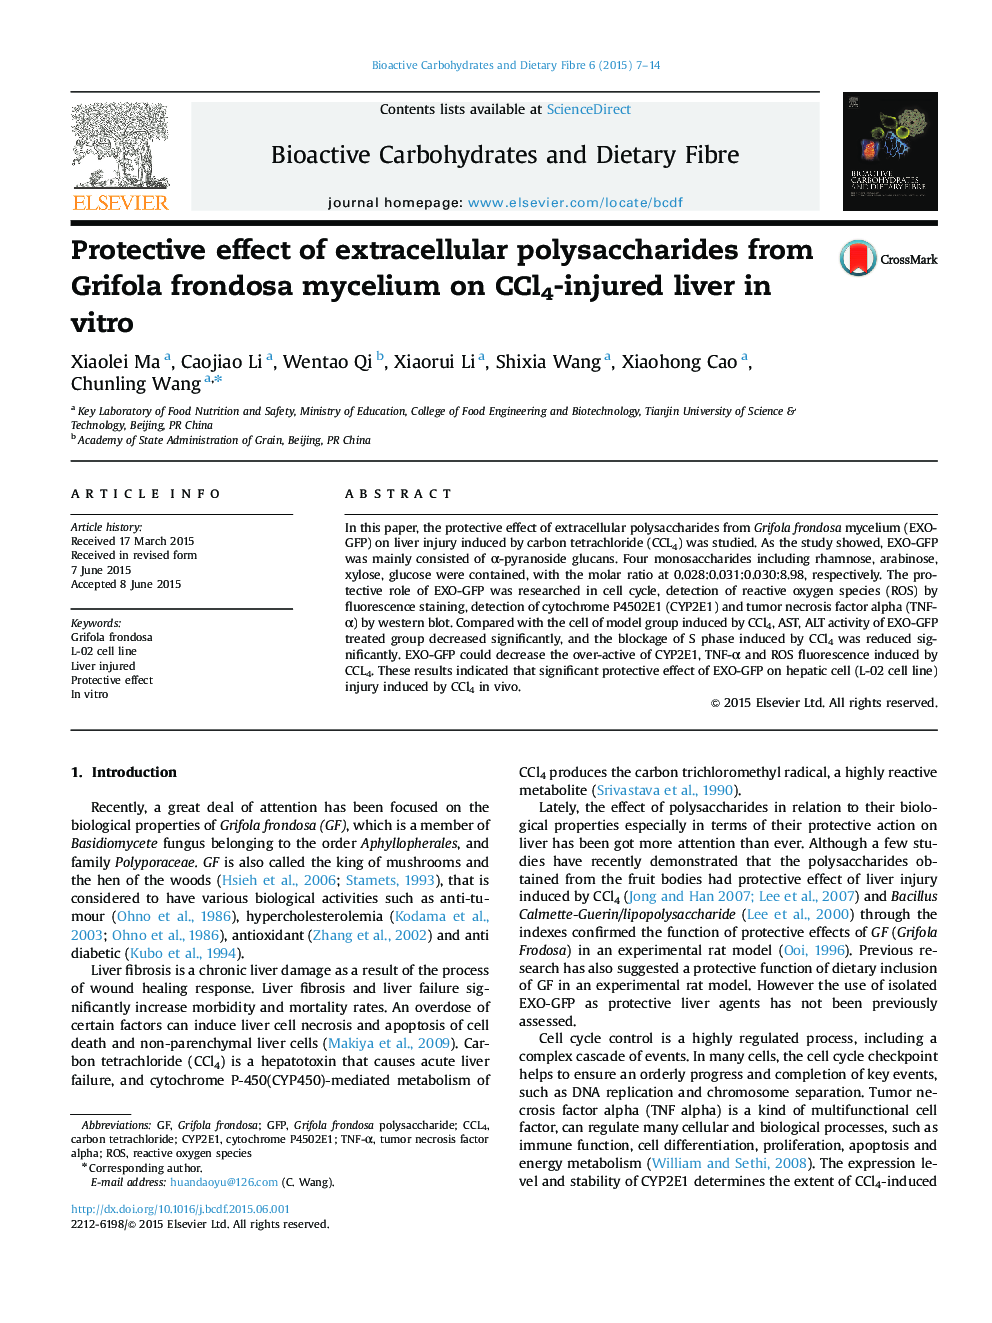 Protective effect of extracellular polysaccharides from Grifola frondosa mycelium on CCl4-injured liver in vitro